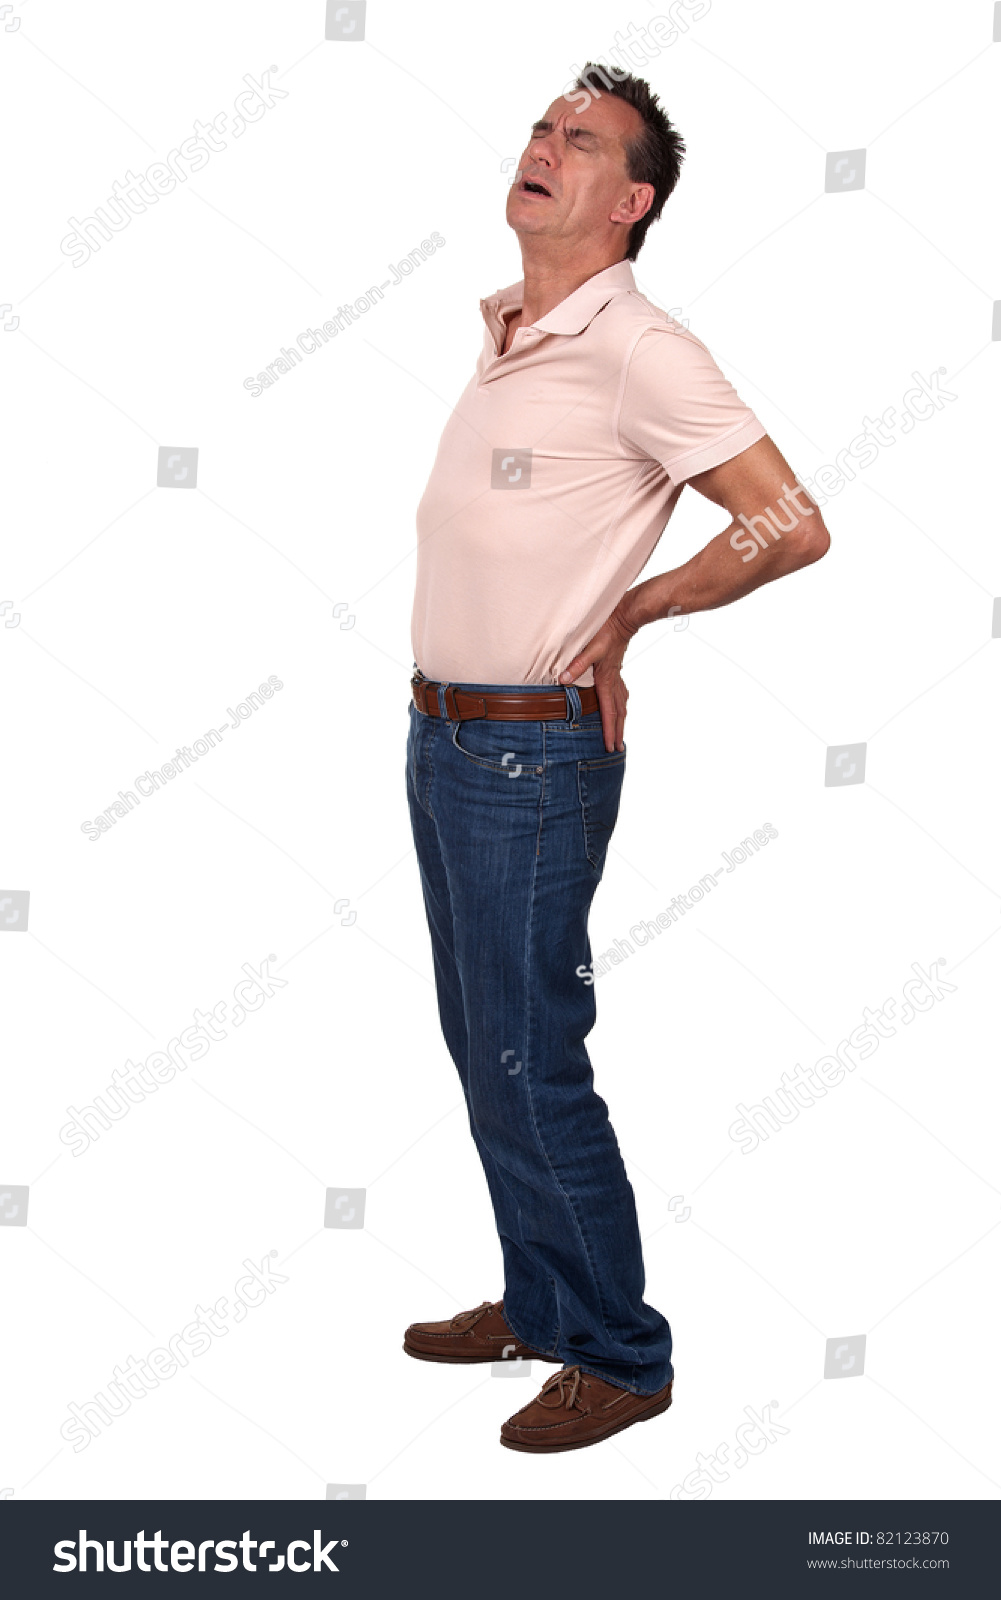 Full Length Portrait of Middle Age Man with Back Pain wearing Casual Clothes #82123870